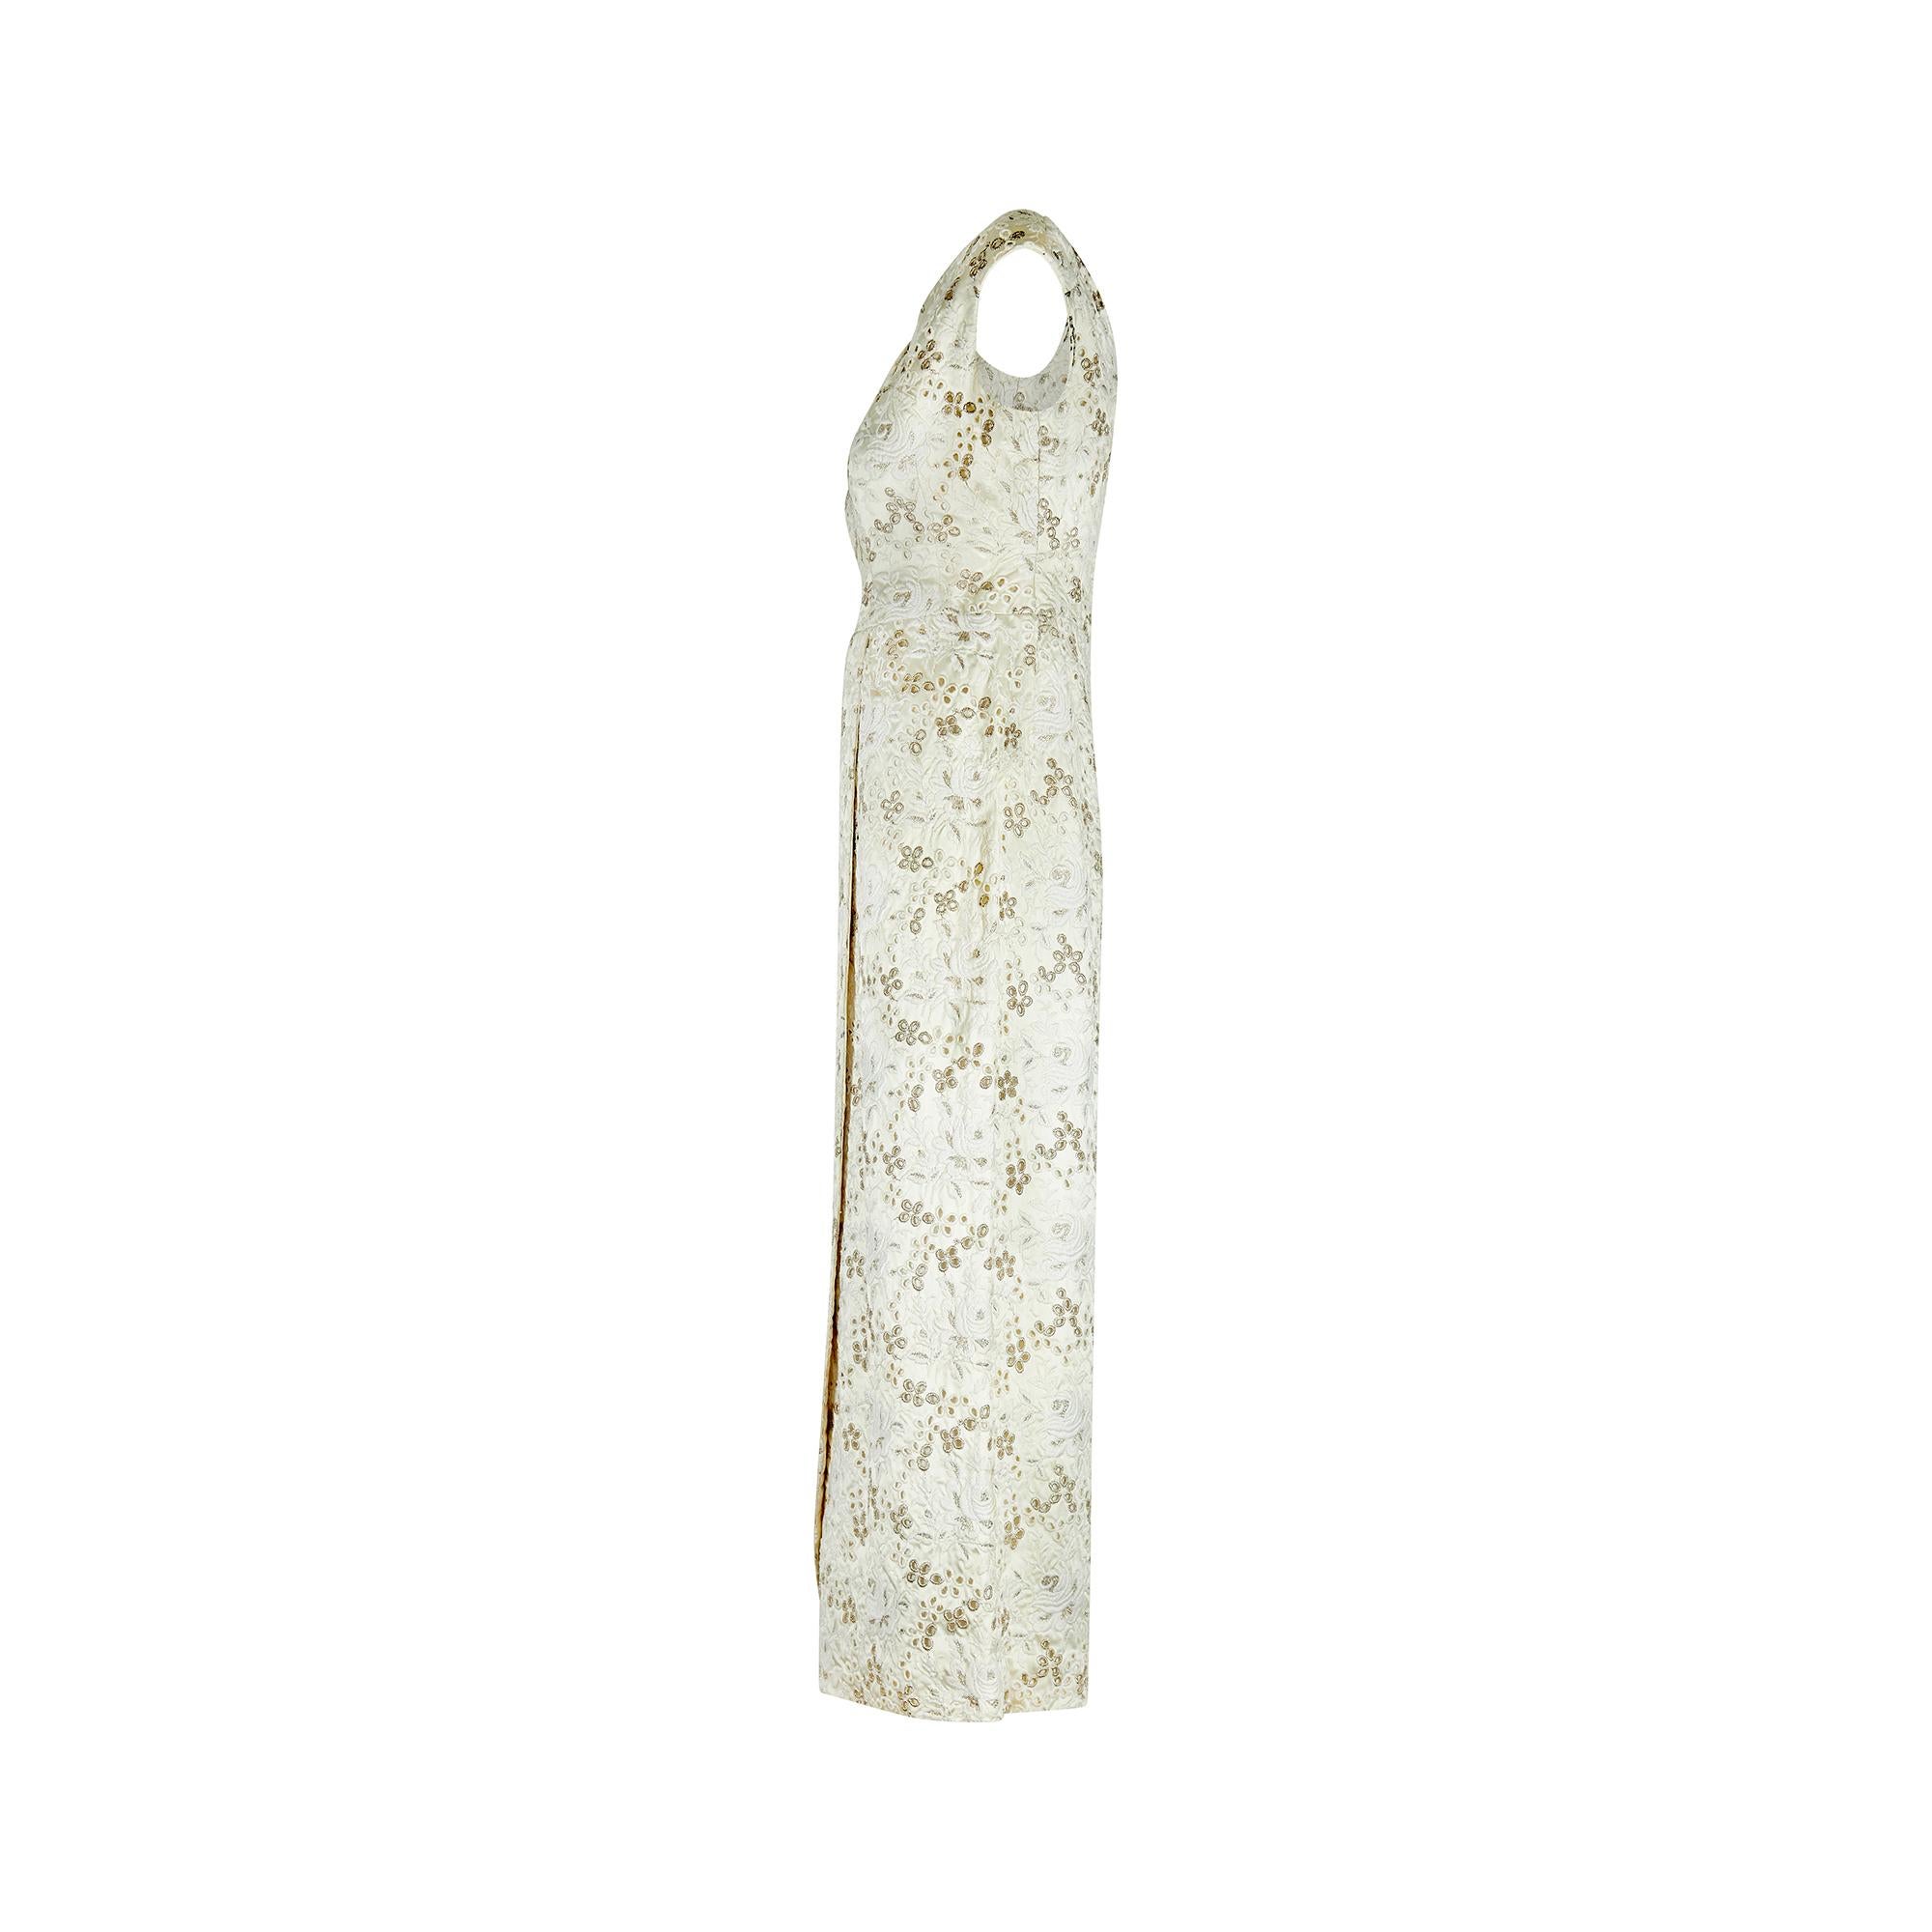 This 1960s column dress is deceptively simple and the epitome of elegance for formal or bridal wear.  It is crafted from white brocade silk with a subtle sheen and detailed from head-to-toe with intricate embroidery of roses.  The floral composition